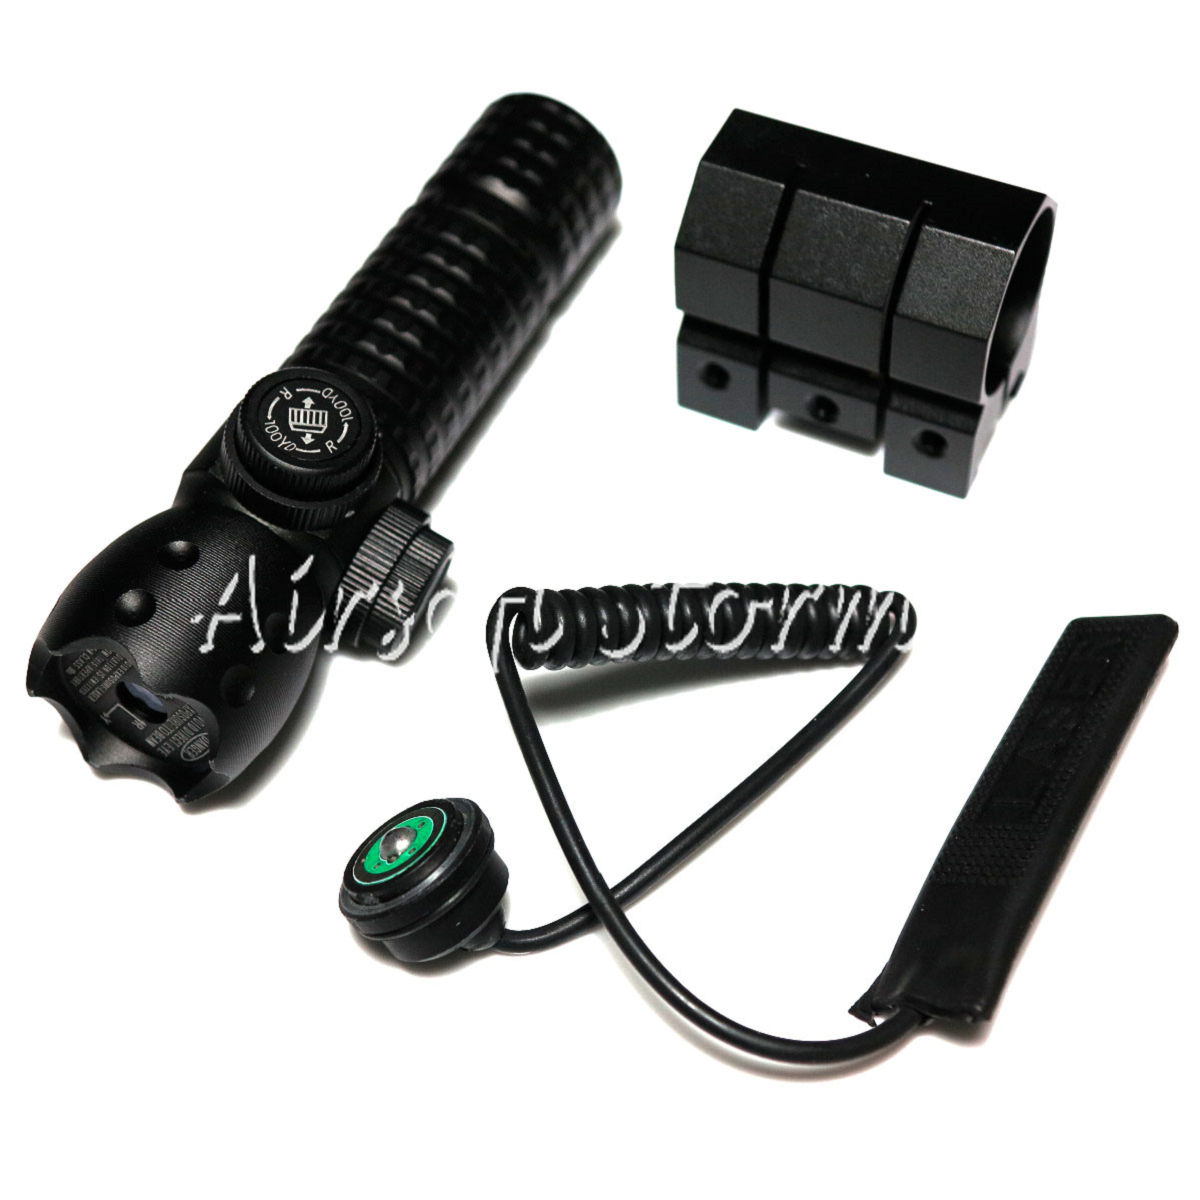 LXGD Tactical Gear Rifle AEG Green Laser Tactical Head Sight Pointer JG-021 - Click Image to Close